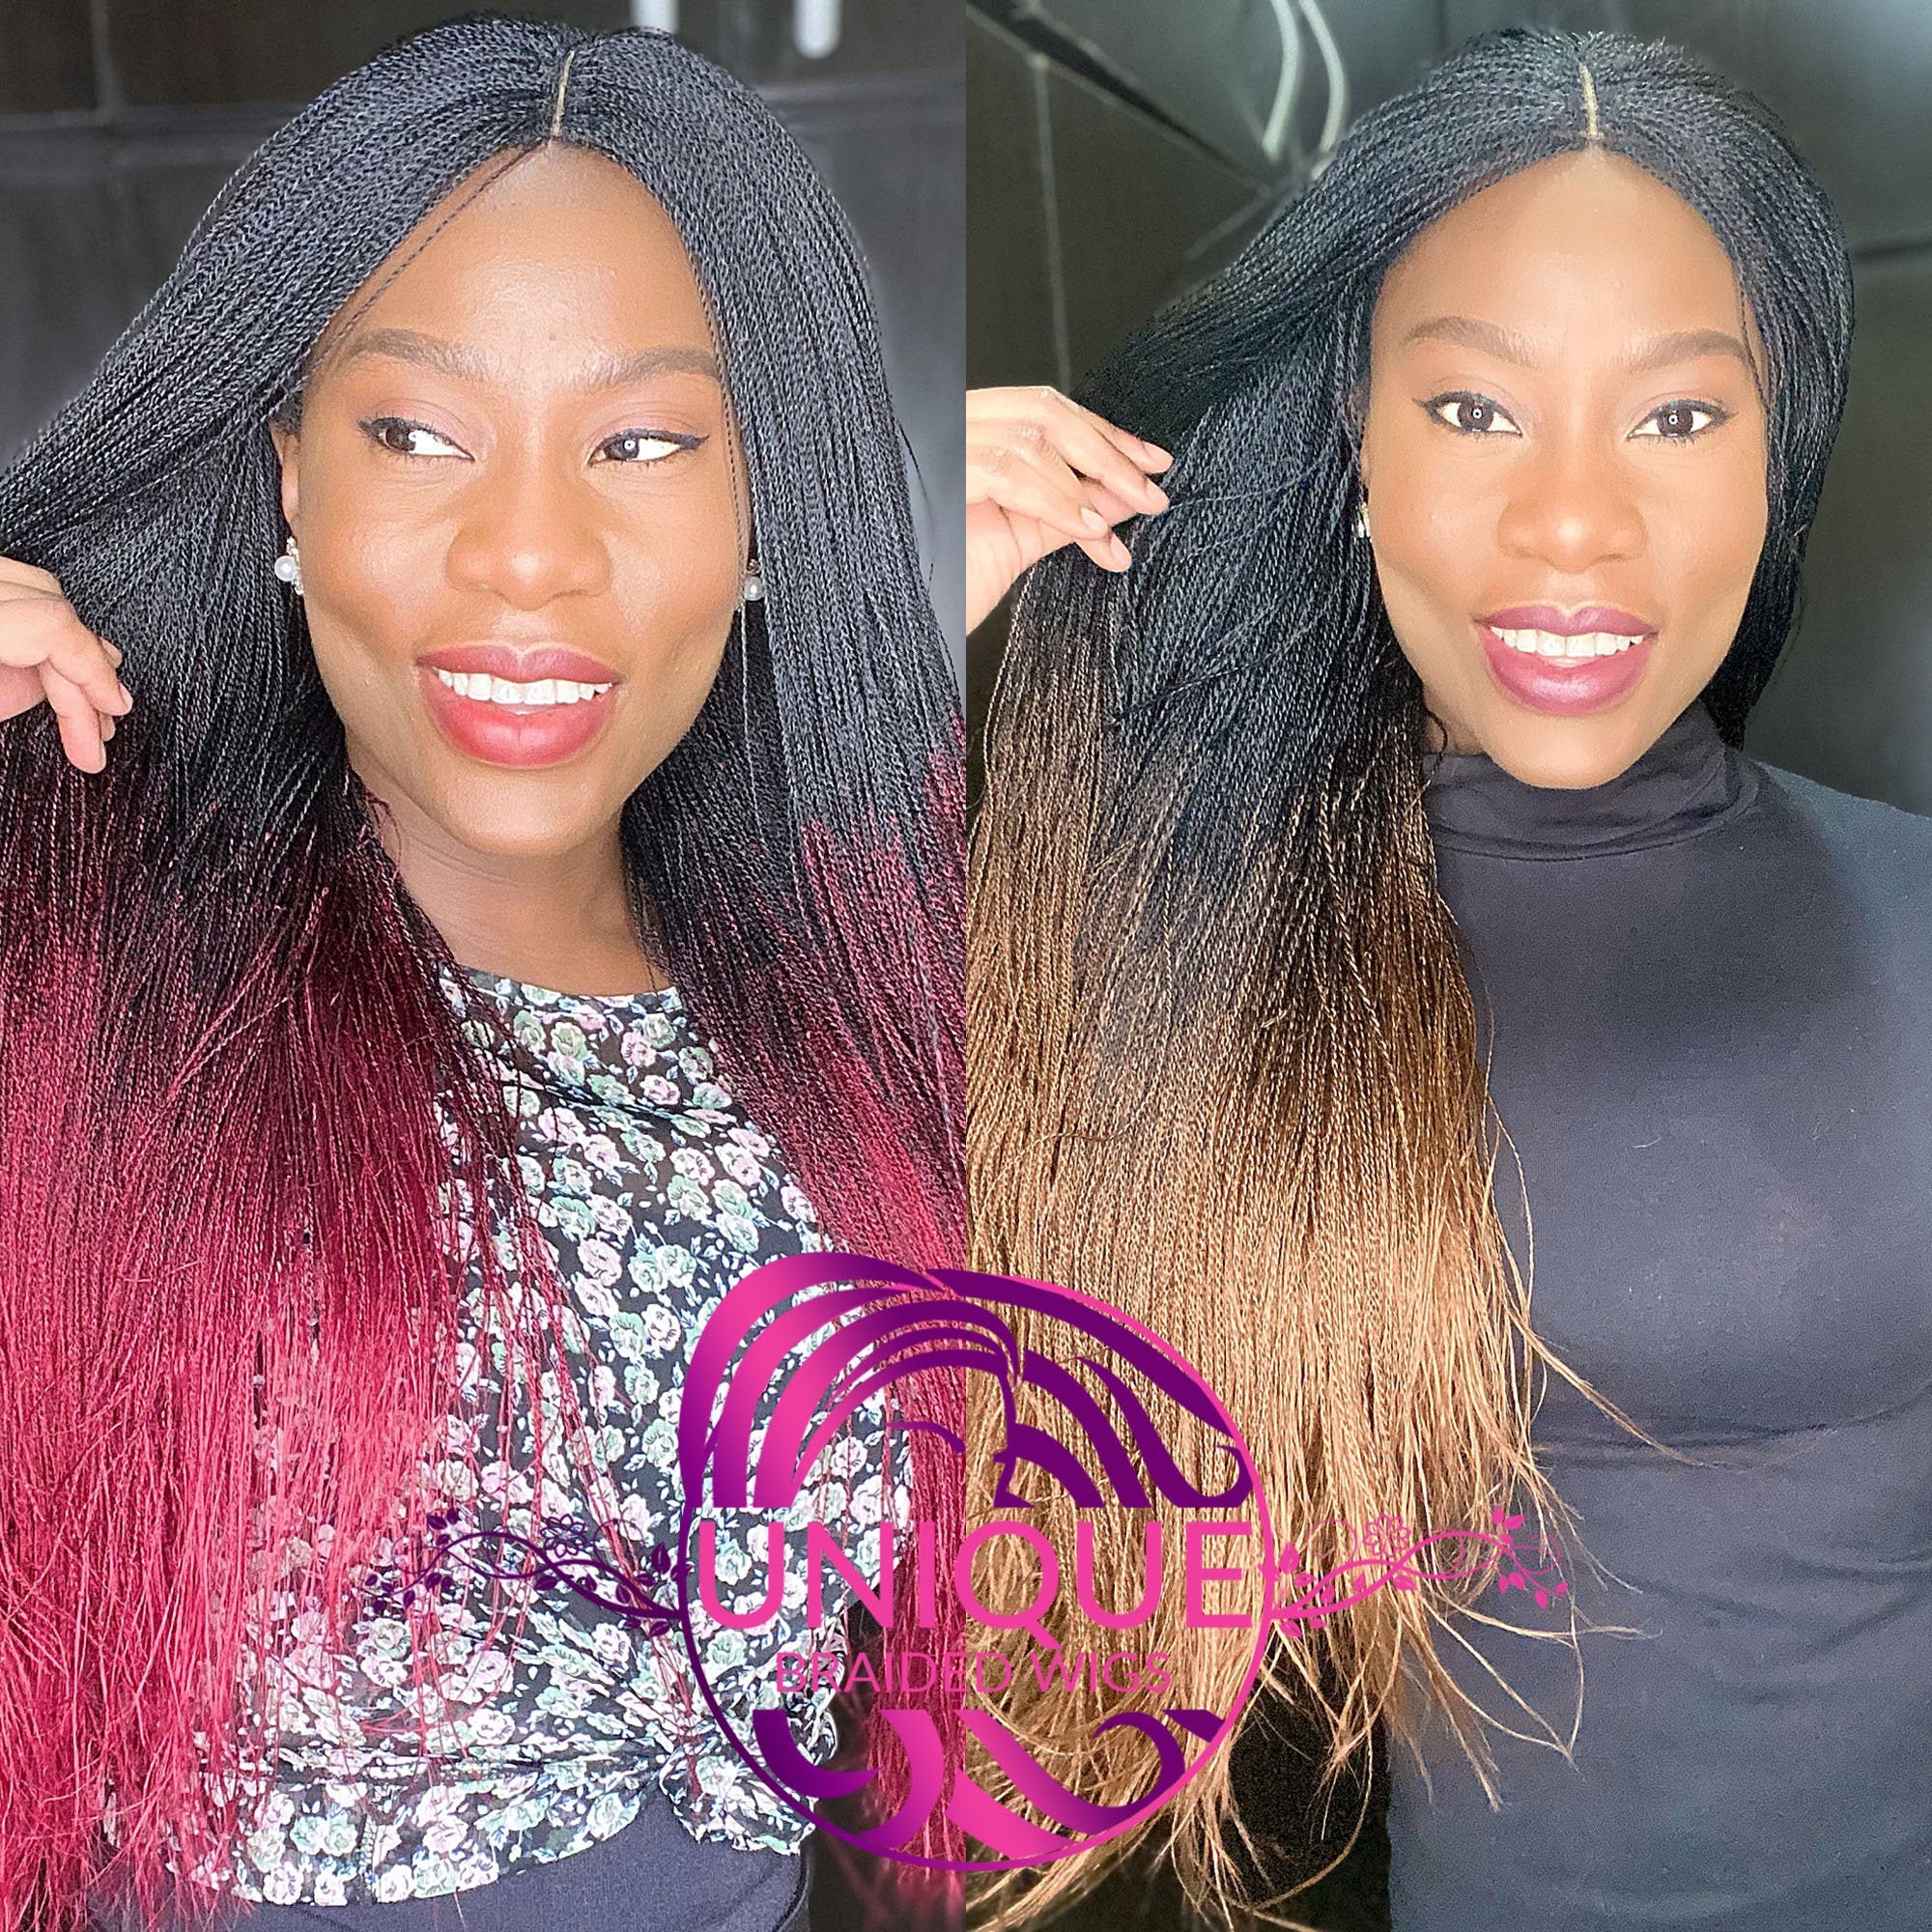 Wig, Braided Wig, Braided Wigs for Black Women, Senegalese Twists, Lace  Front Braids Wig, Micro Twists, Braided Lace Wig, Lace Wig, Handmade 